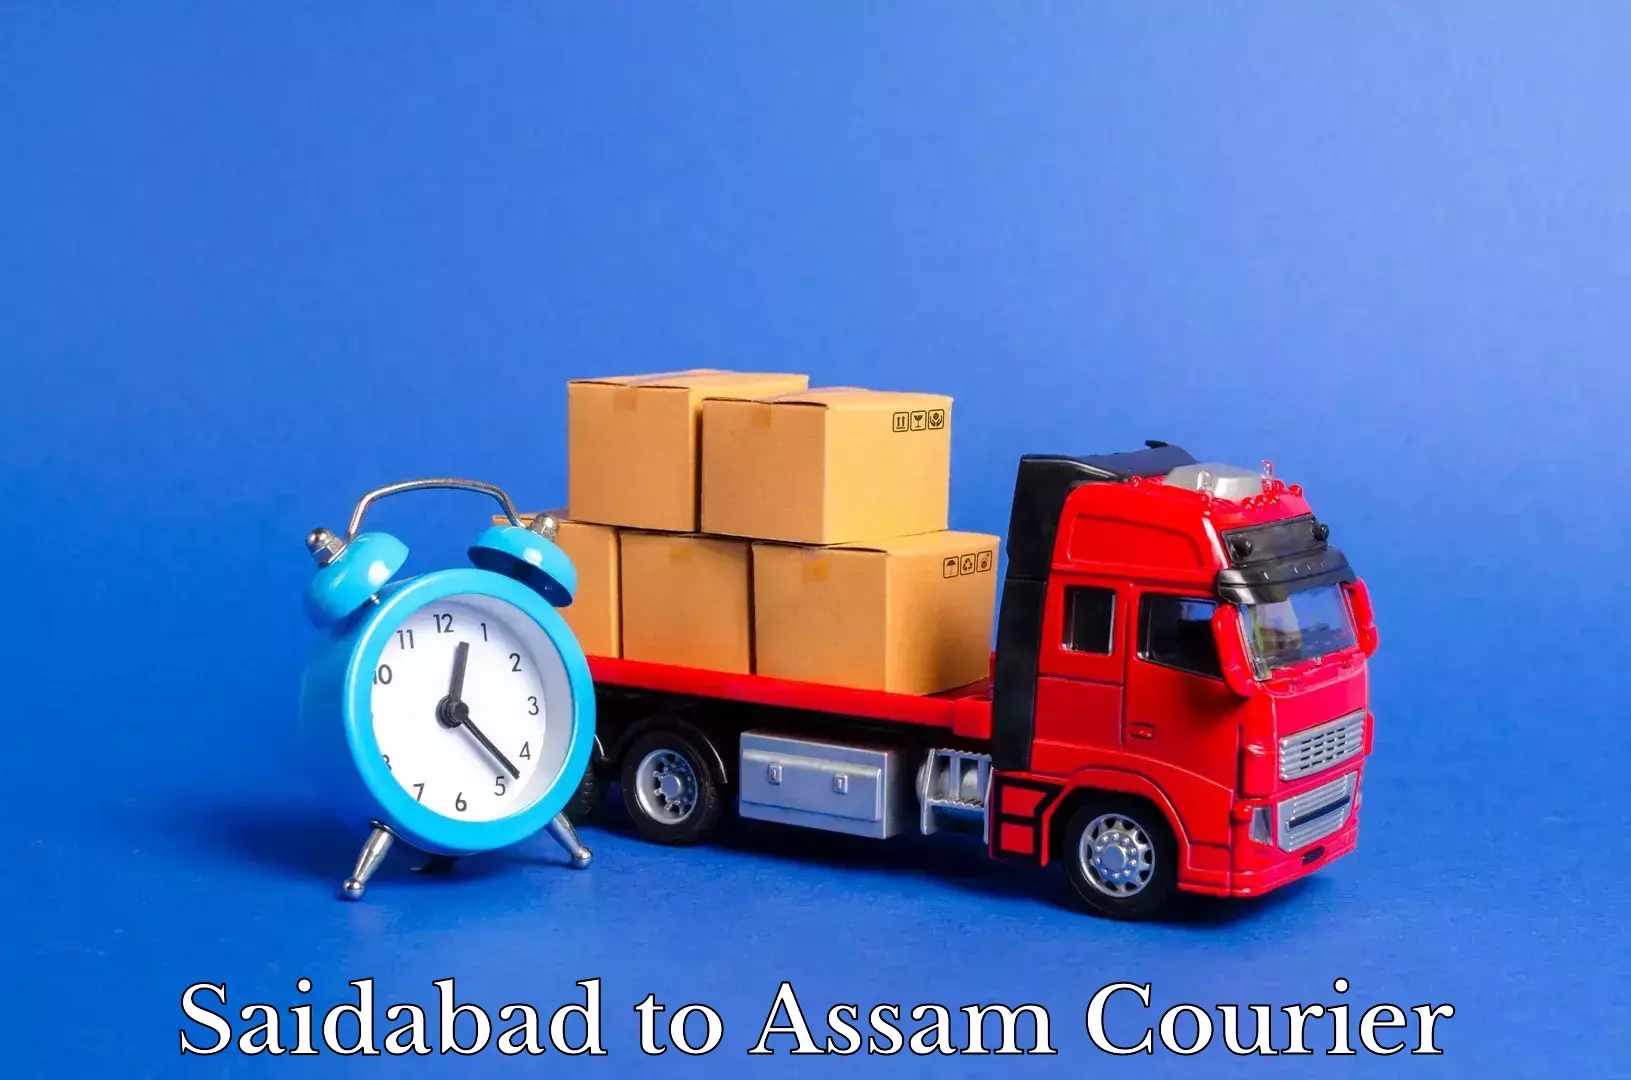 Quality household transport in Saidabad to Kamrup